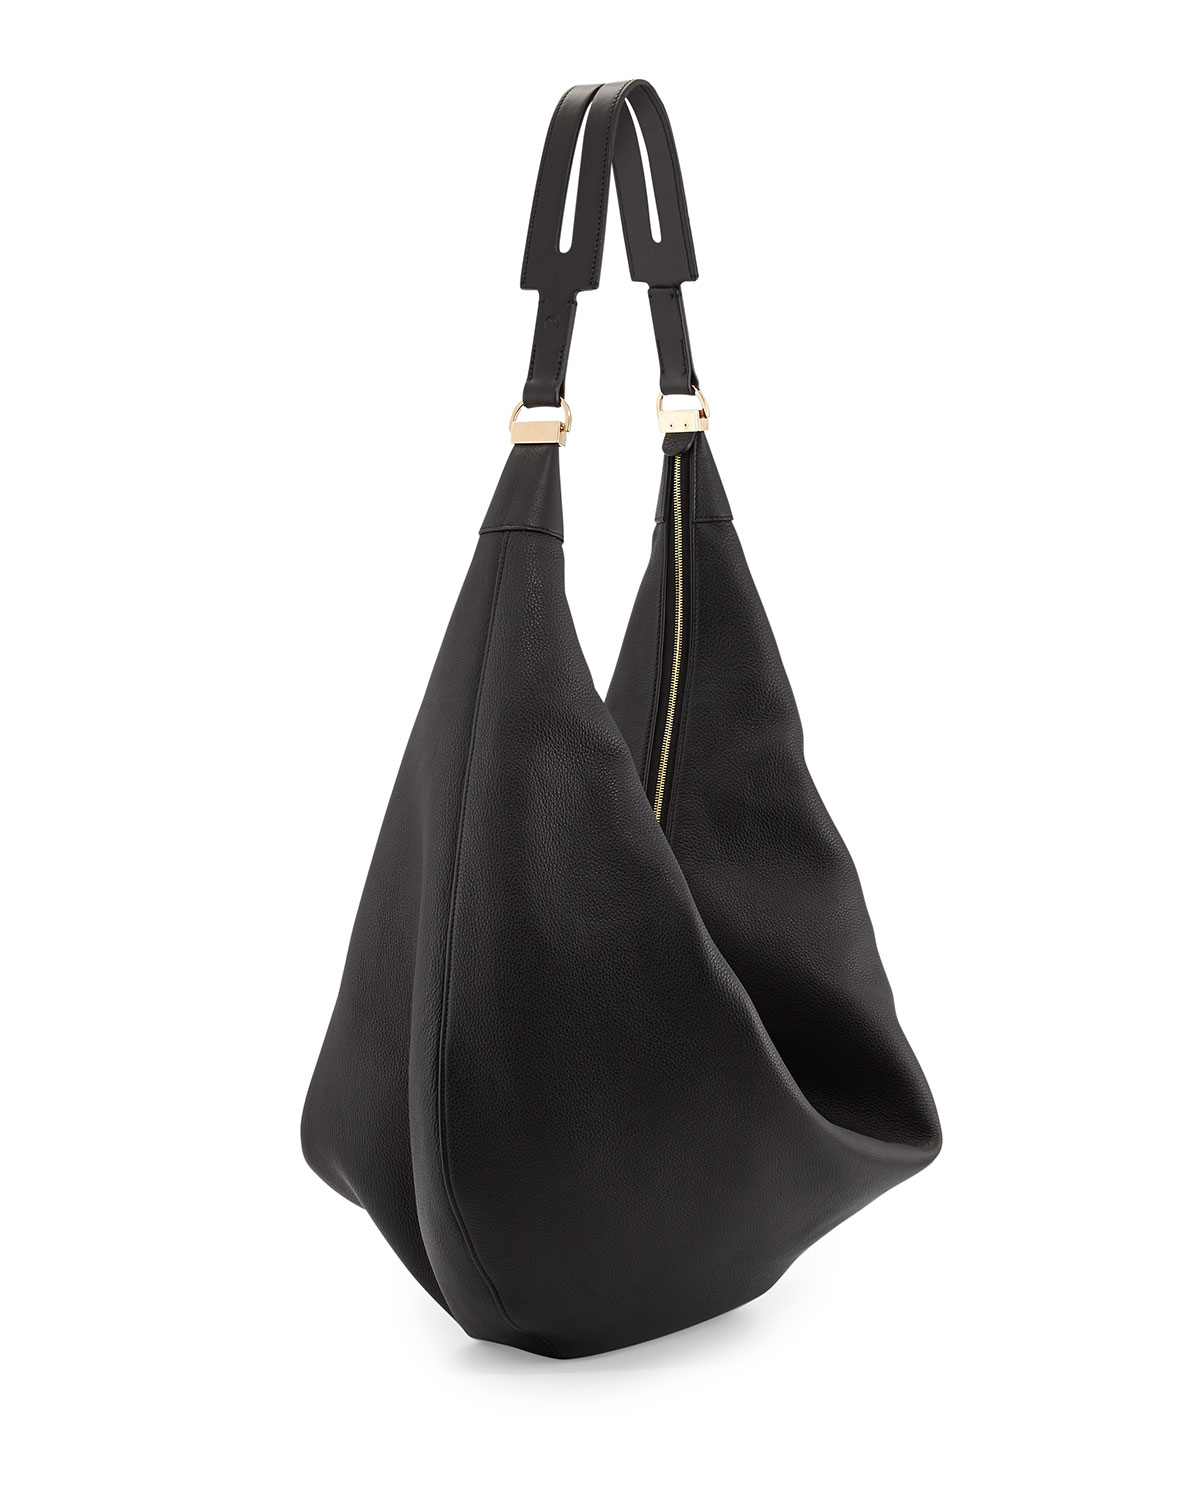 Lyst - The row Sling 15 Grained Leather Hobo Bag in Black